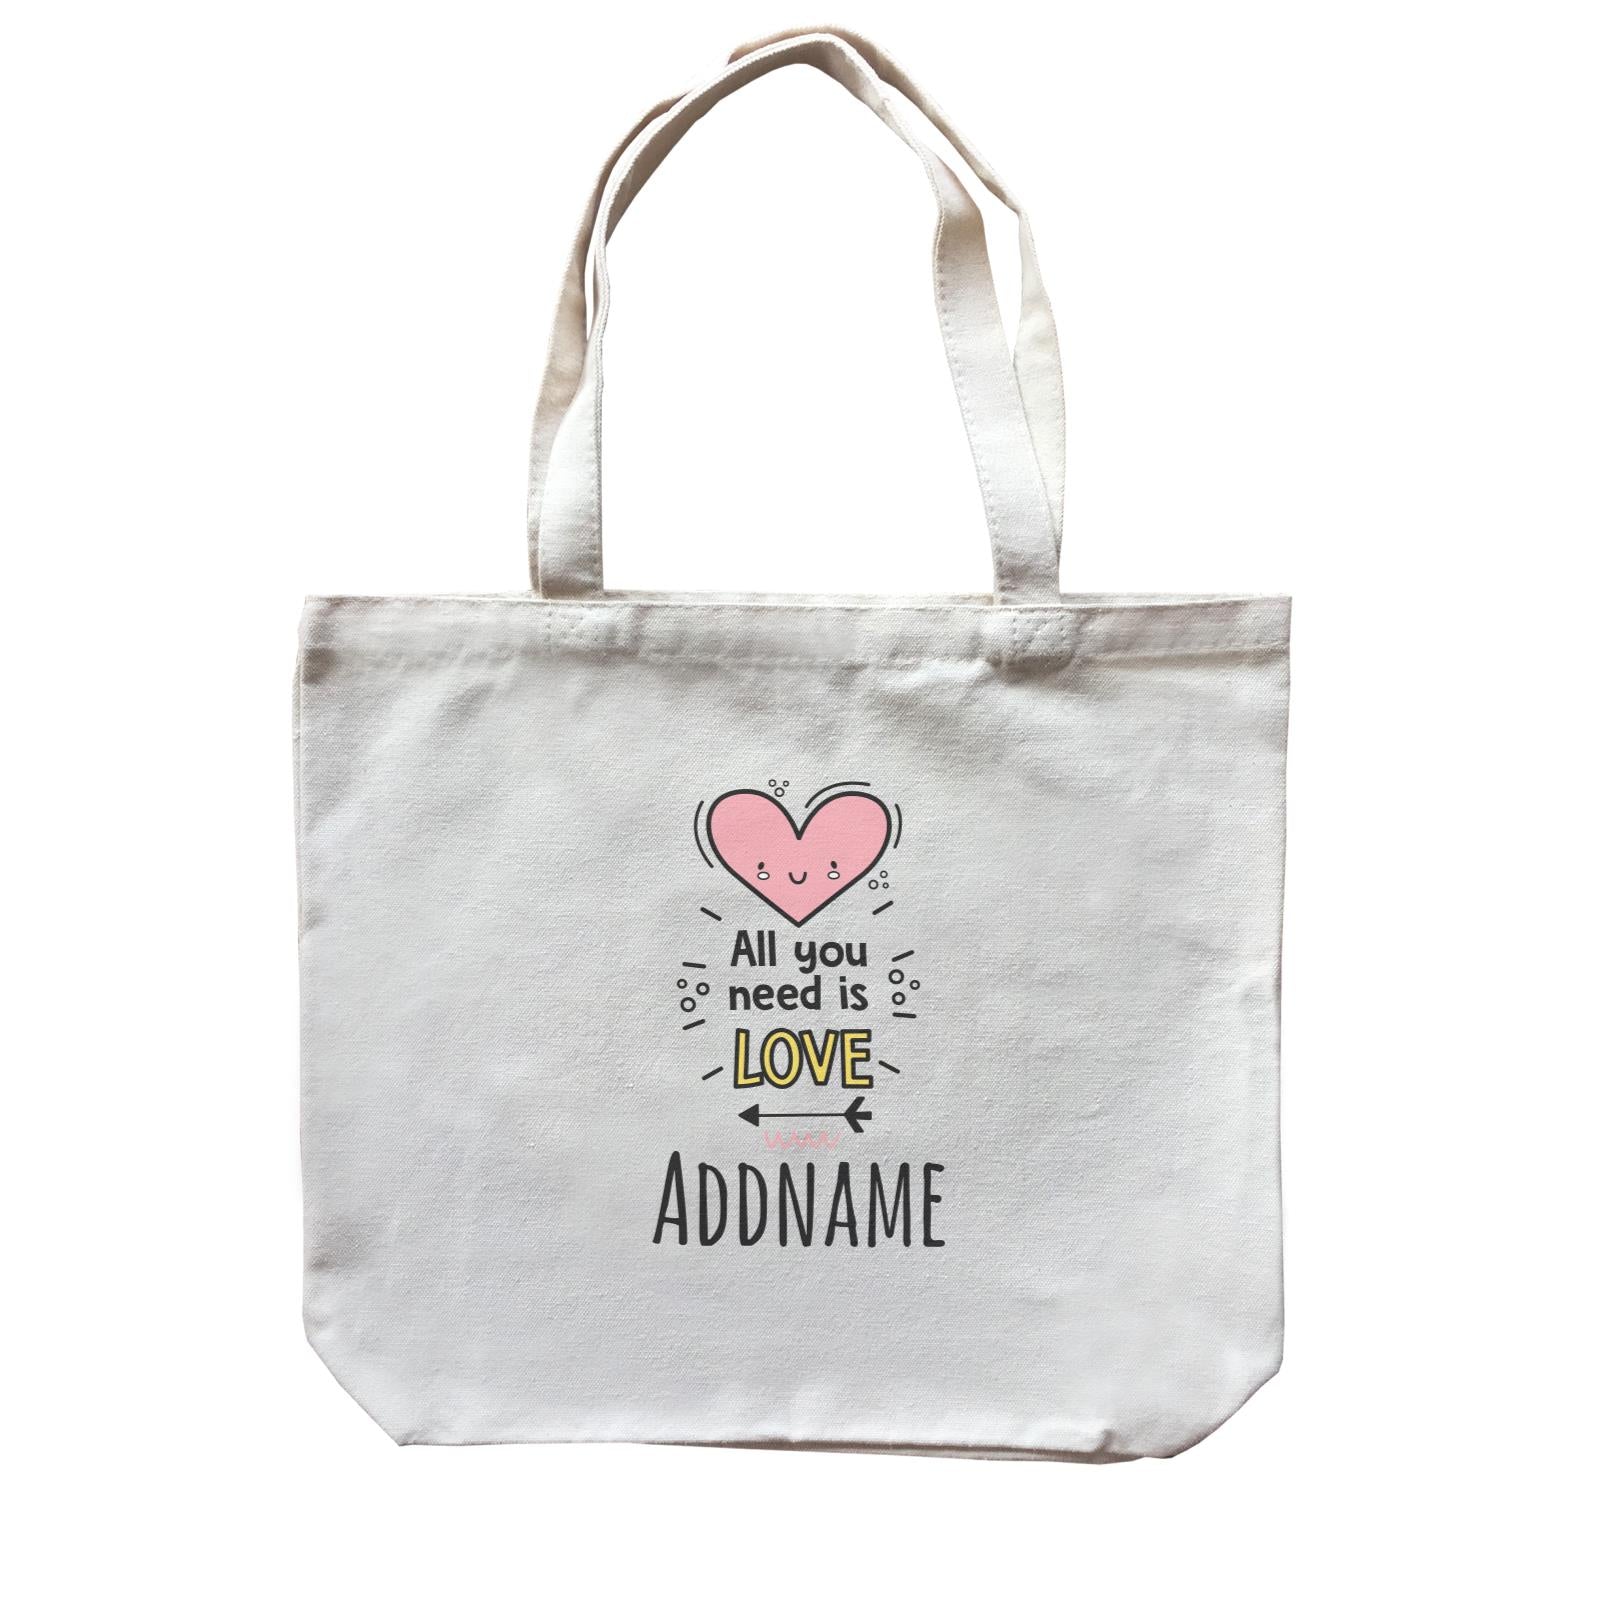 Drawn Baby Elements All You Need Is Love Addname Canvas Bag